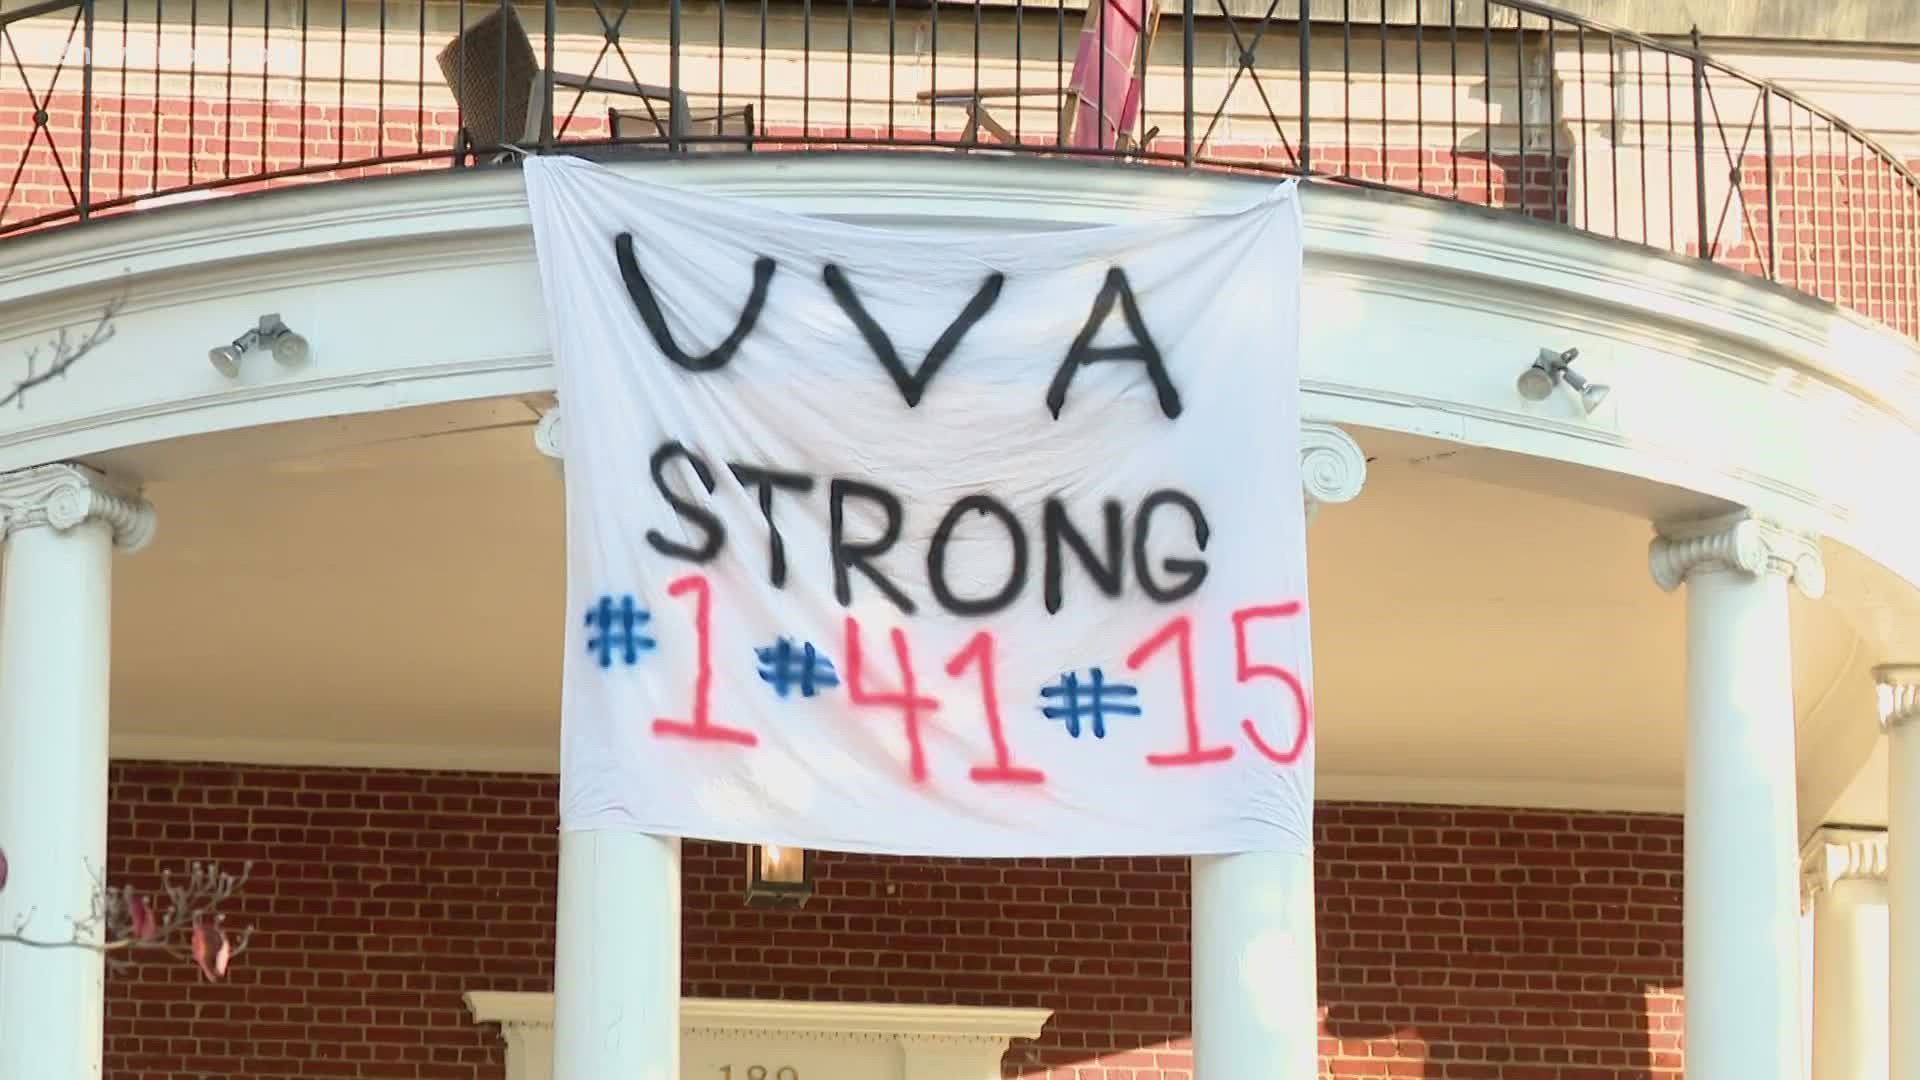 Hundreds of students filled the South Lawn at the University of Virginia to honor the three football players who were shot and killed Sunday night.